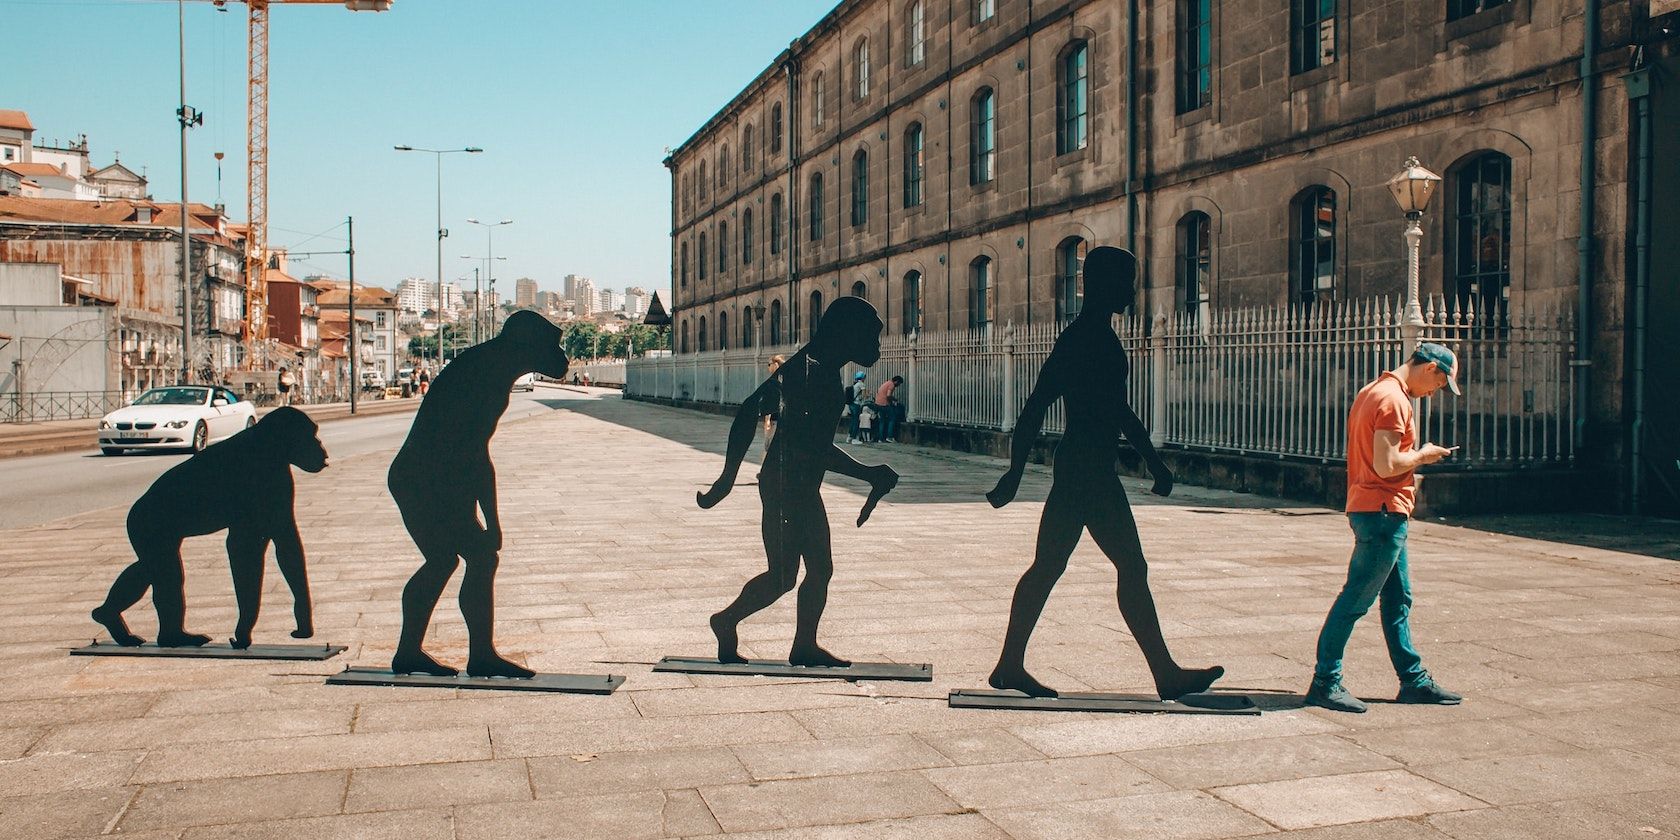 Four sculptures representing the evolution of man, from an ape on the left, to modern man on the right. To the right of these sculptures is a real person, staring intently at their mobile phone.